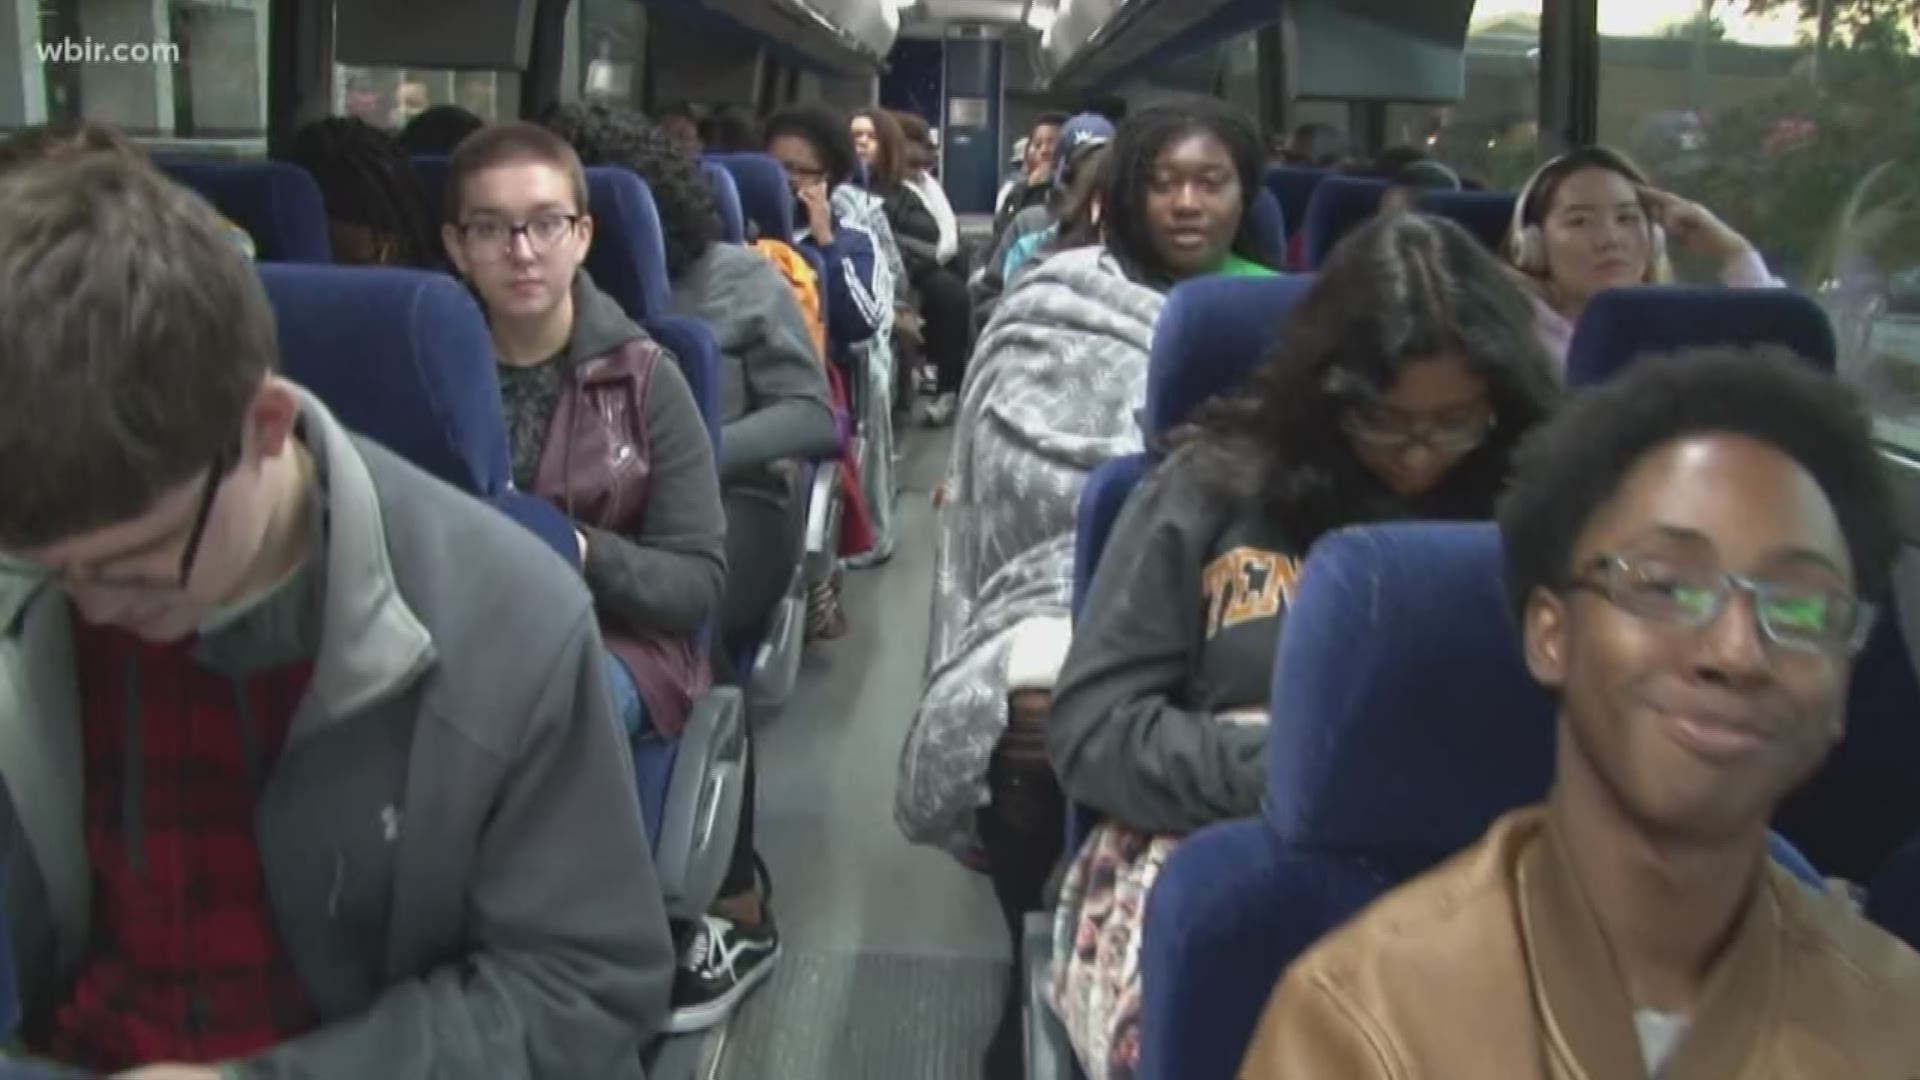 Several UT Students boarded a bus to head home for thanksgiving.